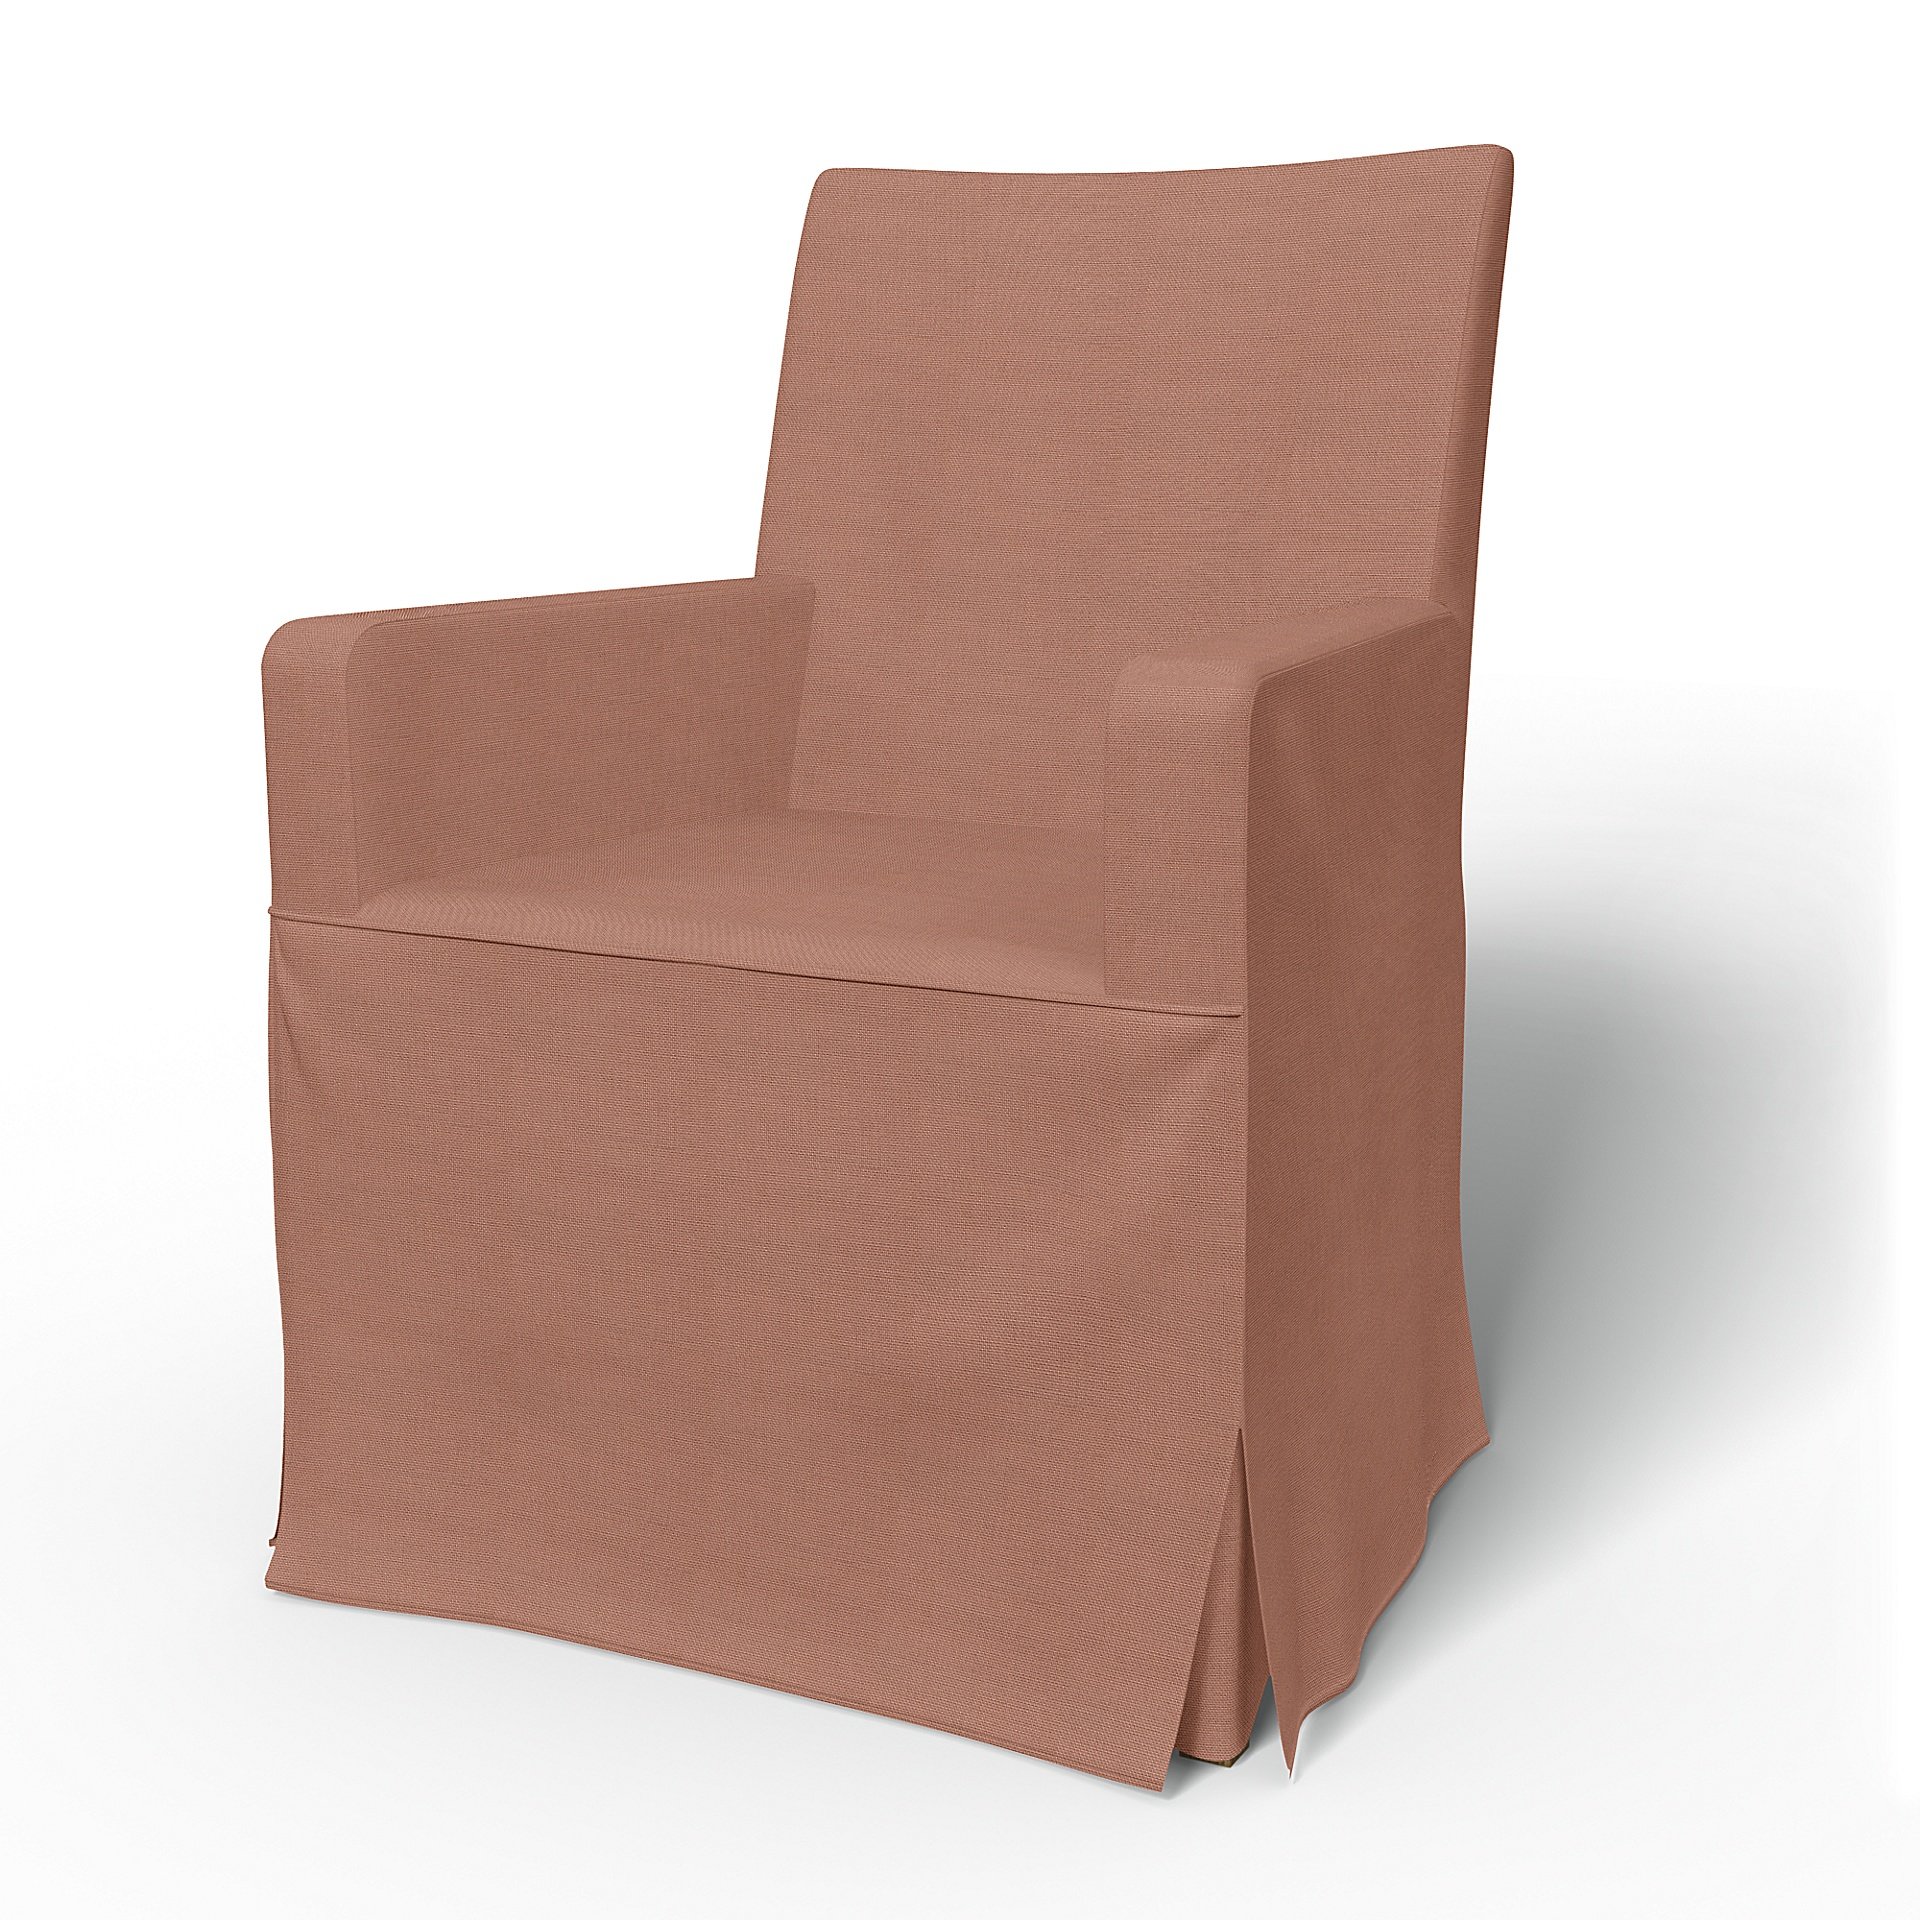 IKEA - Henriksdal, Chair cover w/ armrests, long skirt box pleat, Dusty Pink, Outdoor - Bemz